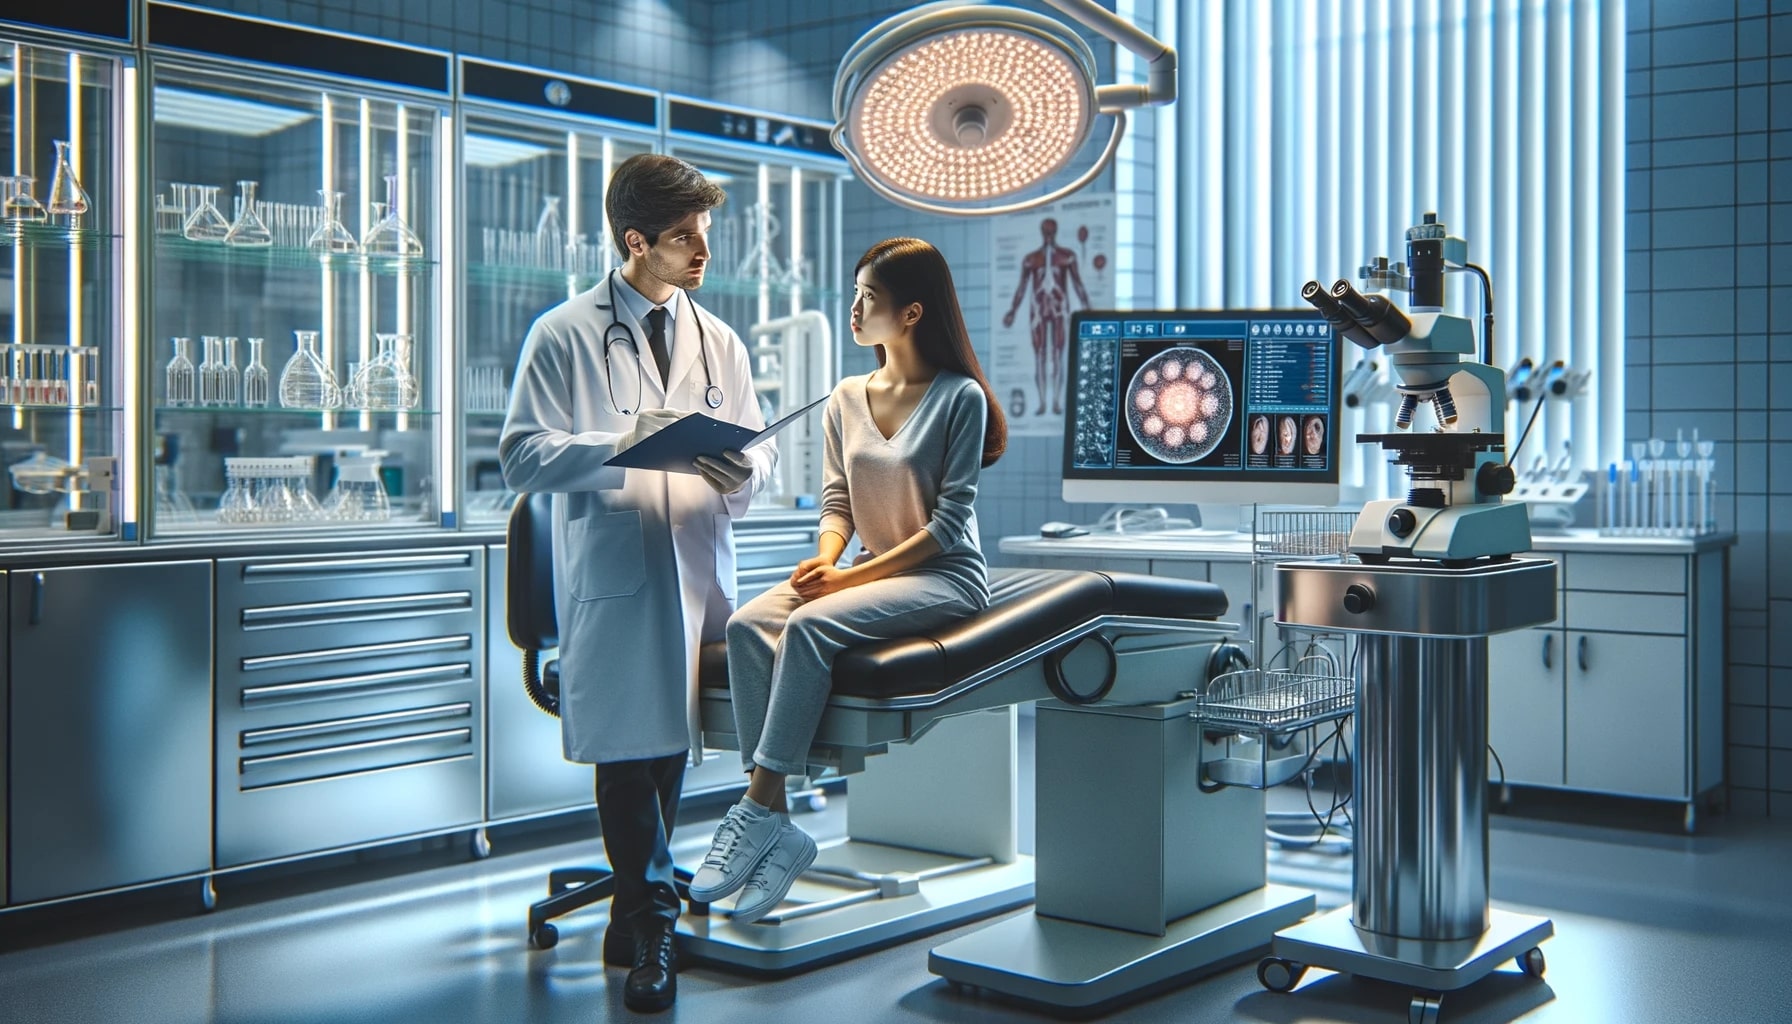 hoto of a modern medical laboratory with stainless steel equipment, bright LED lights, and a computer setup. In the foreground, a Caucasian male doctor in a white coat and a stethoscope is explaining a procedure to an Asian female patient seated on an examination table. The patient listens attentively, holding a brochure about the stem cell treatment. The walls are adorned with medical charts and posters, and a microscope sits on a nearby counter.